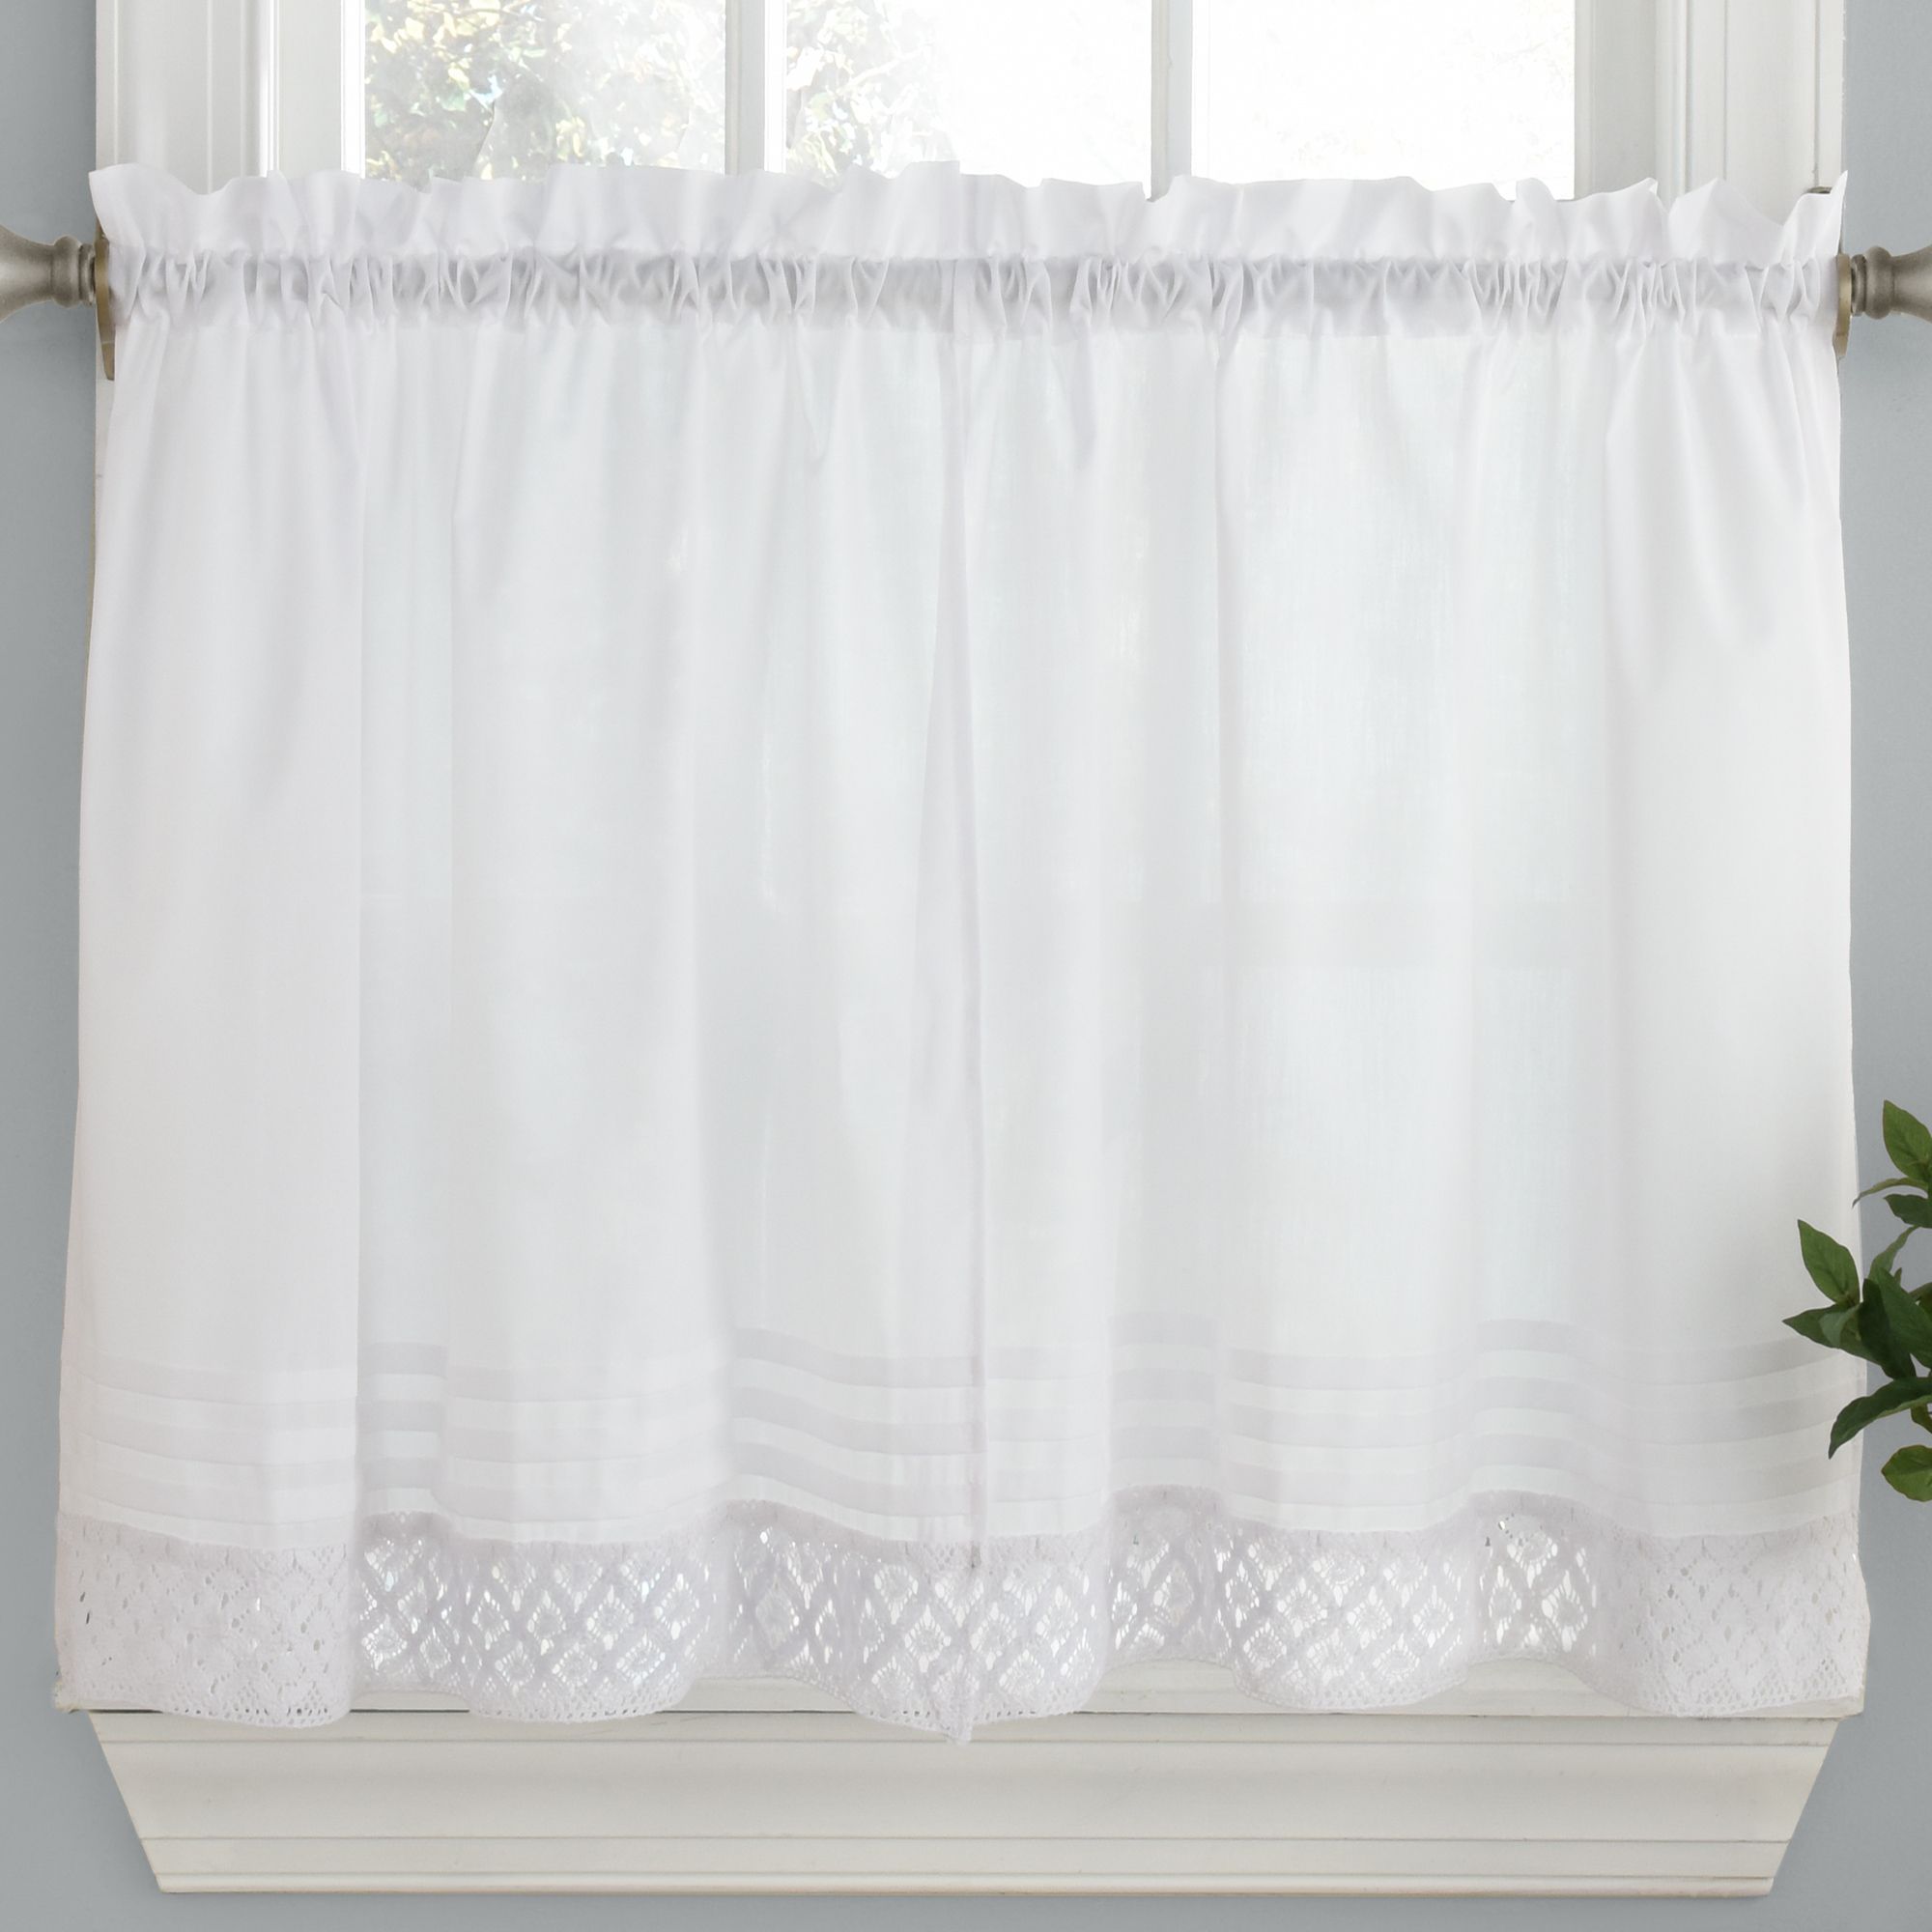 Pleated Crochet Kitchen Window Curtain Tier Pair Or Valance White For Pleated Curtain Tiers (View 5 of 20)